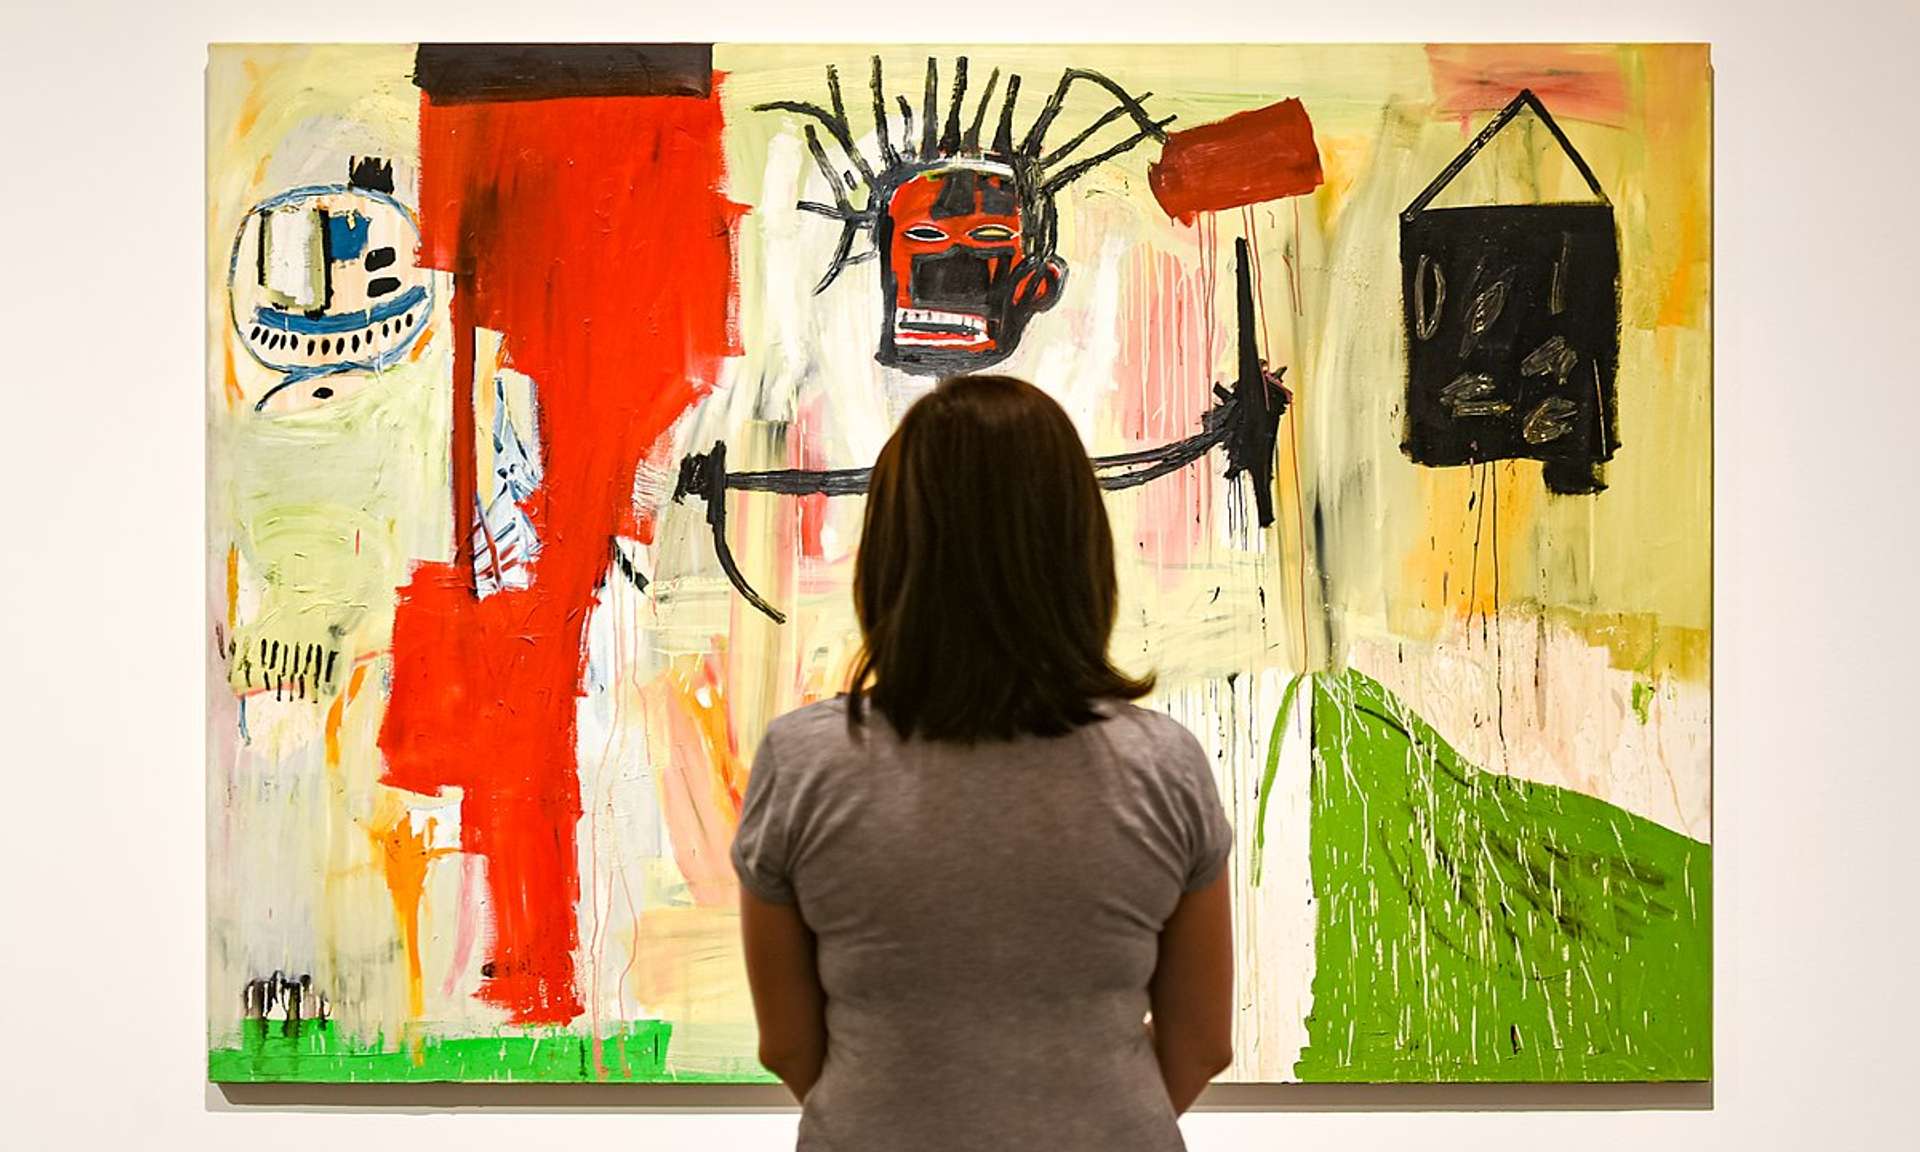 Jean-Michel Basquiat's Self-Portrait (1986), with a woman looking at the painting.